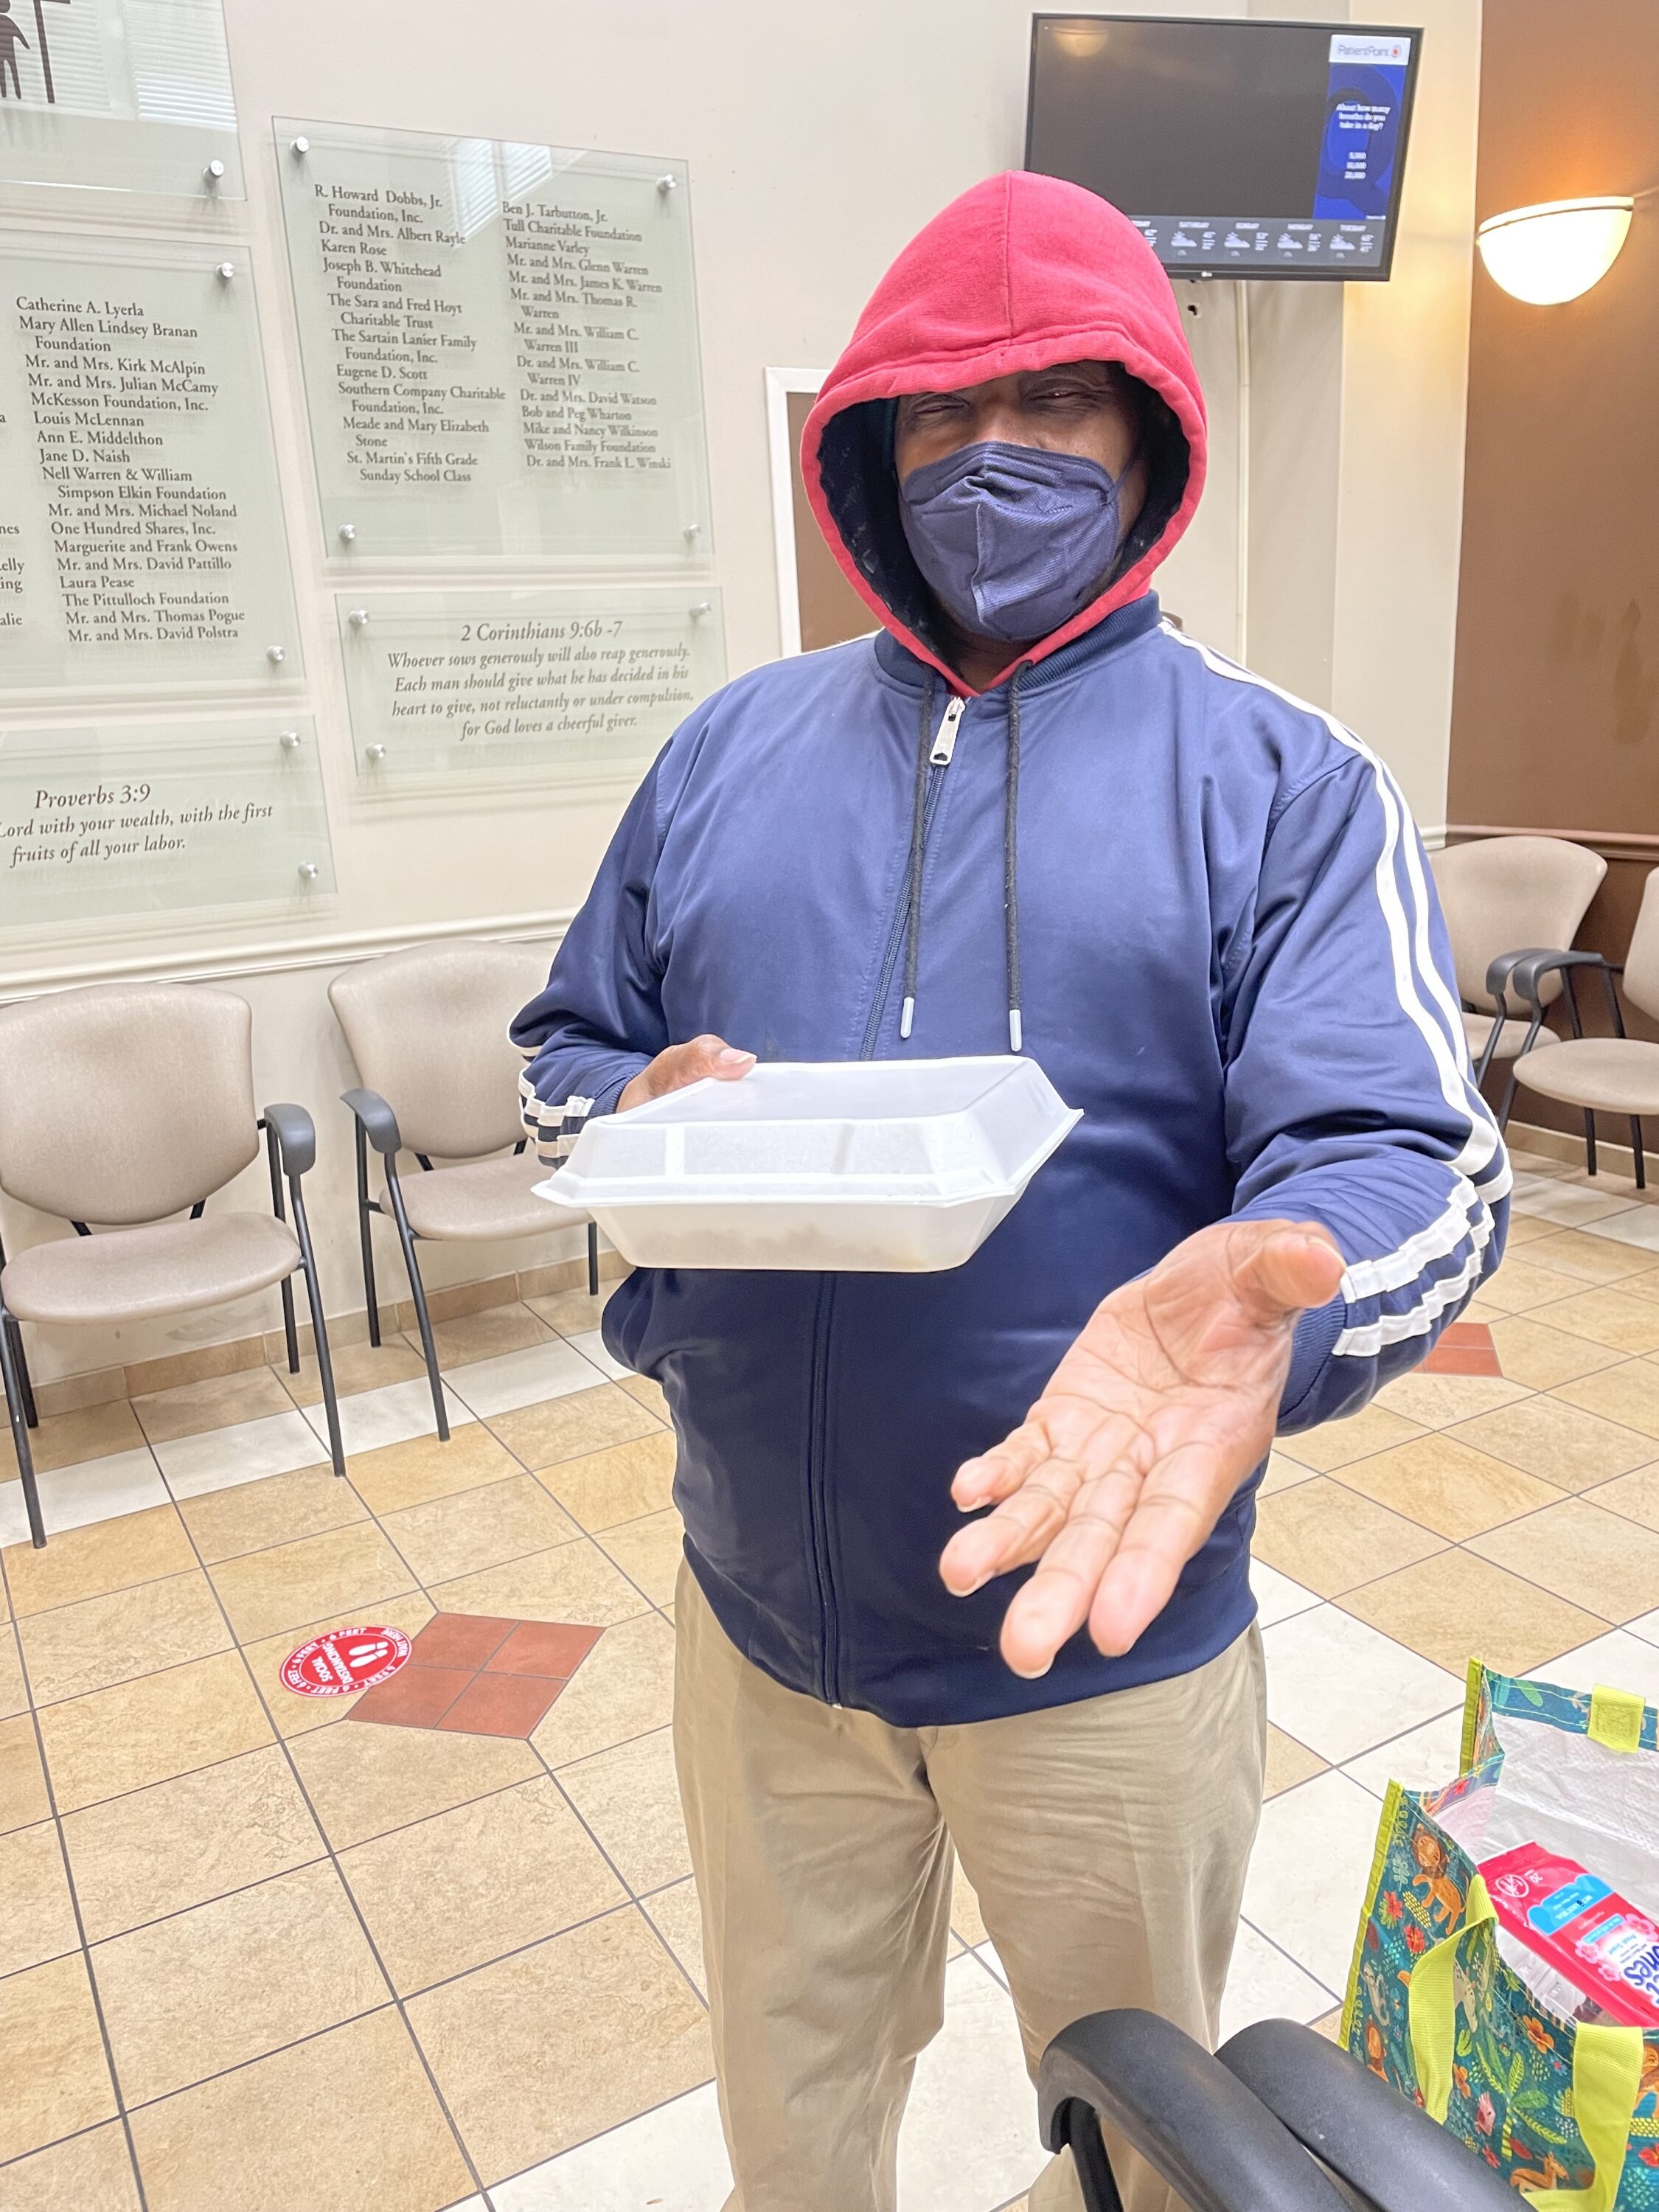 Good Sam Friday Patient receiving a meal and Hygiene Kit with Care Package containing donations from Whole Foods, Gus’s Fried Chicken and other partners.